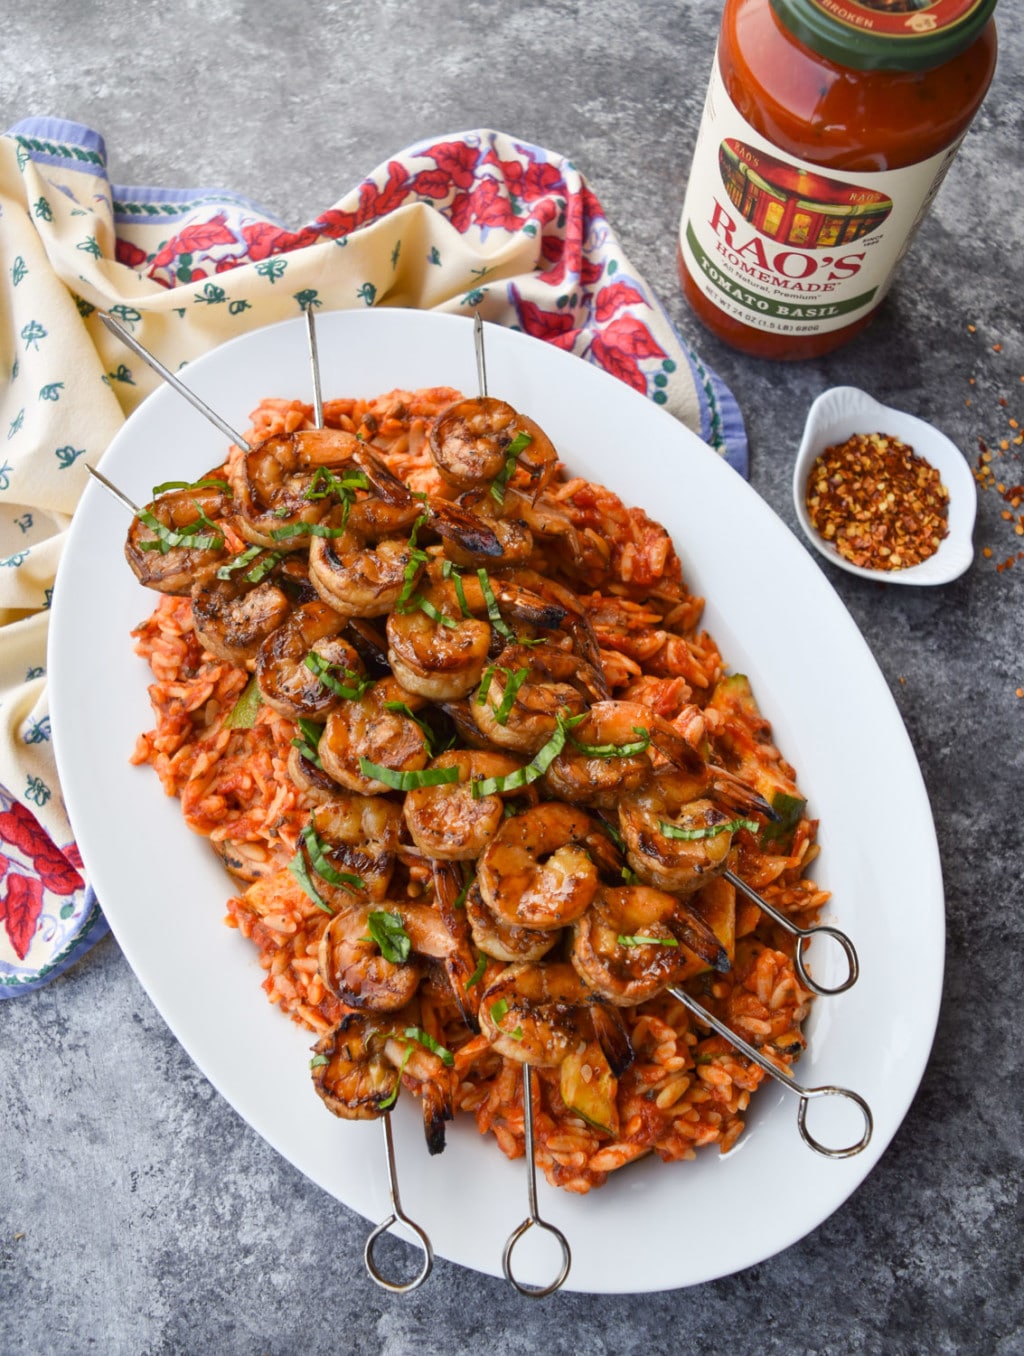 Horizontal platter of orzo with tomato sauce topped with four skewers of grilled shrimp alongside a jar of Rao's Homemade Tomato Basil Sauce.